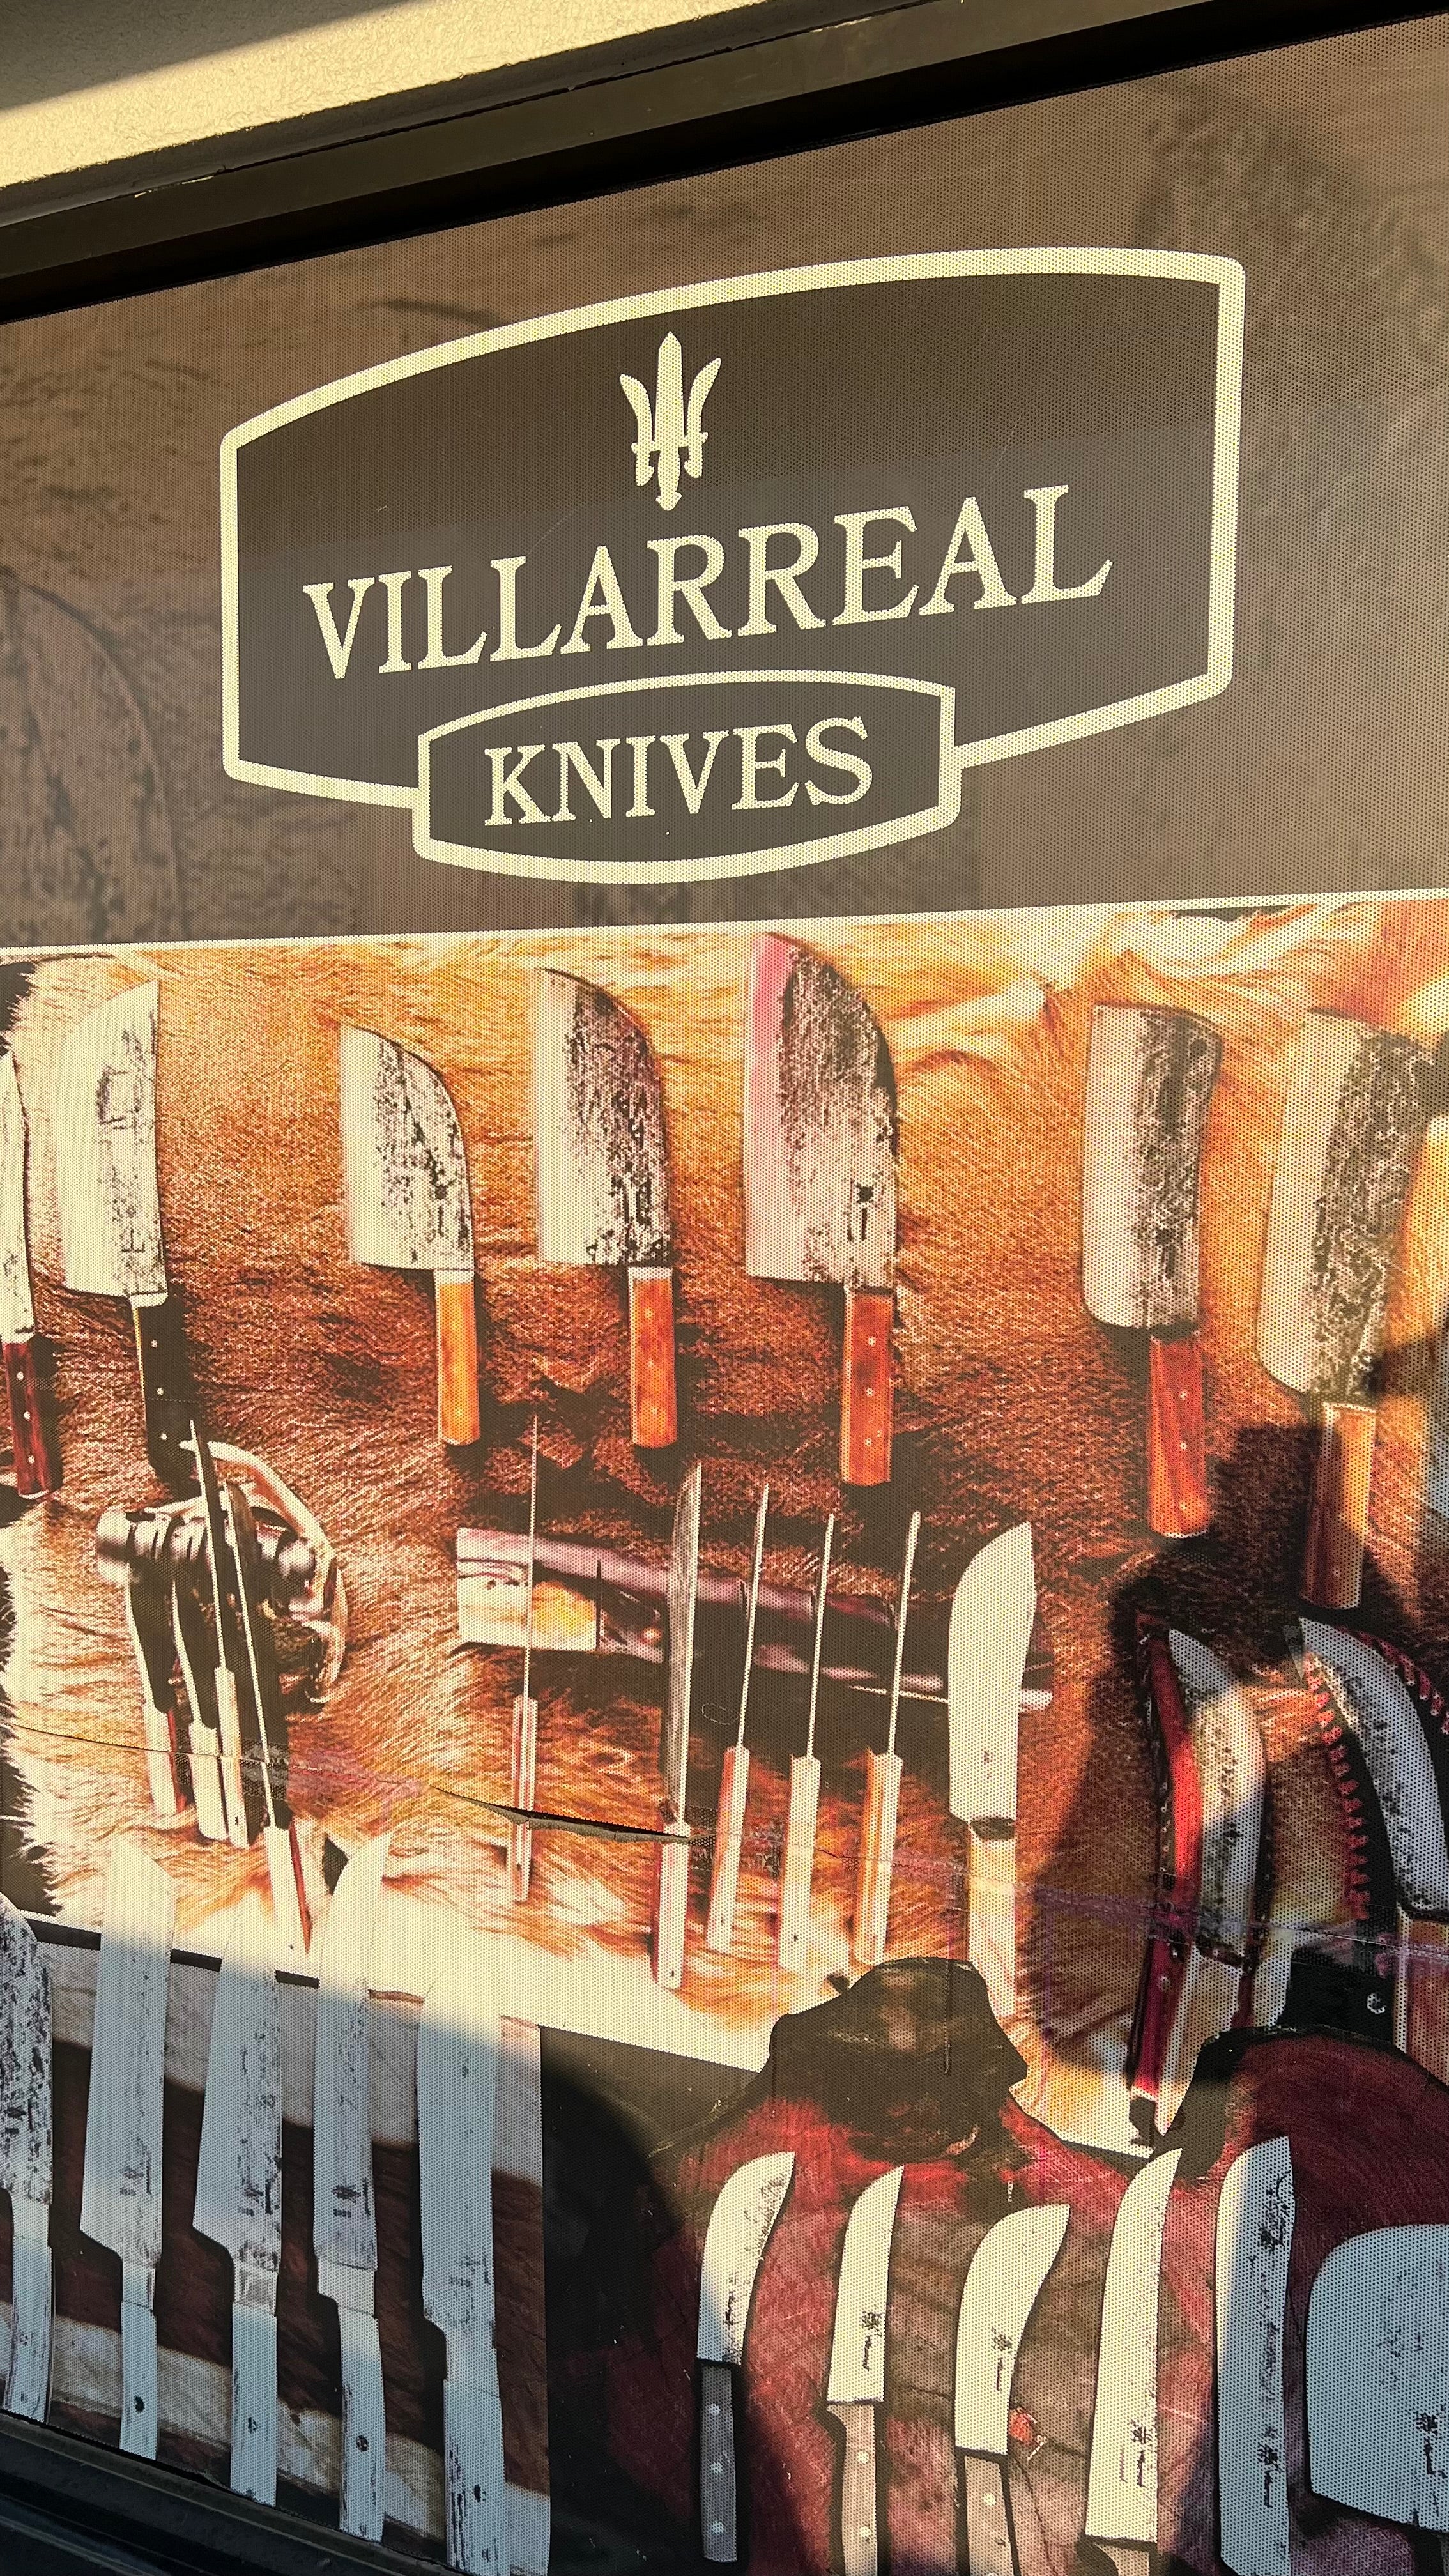 Cargar video: Video shows the cleaning process of our handcrafted knives.